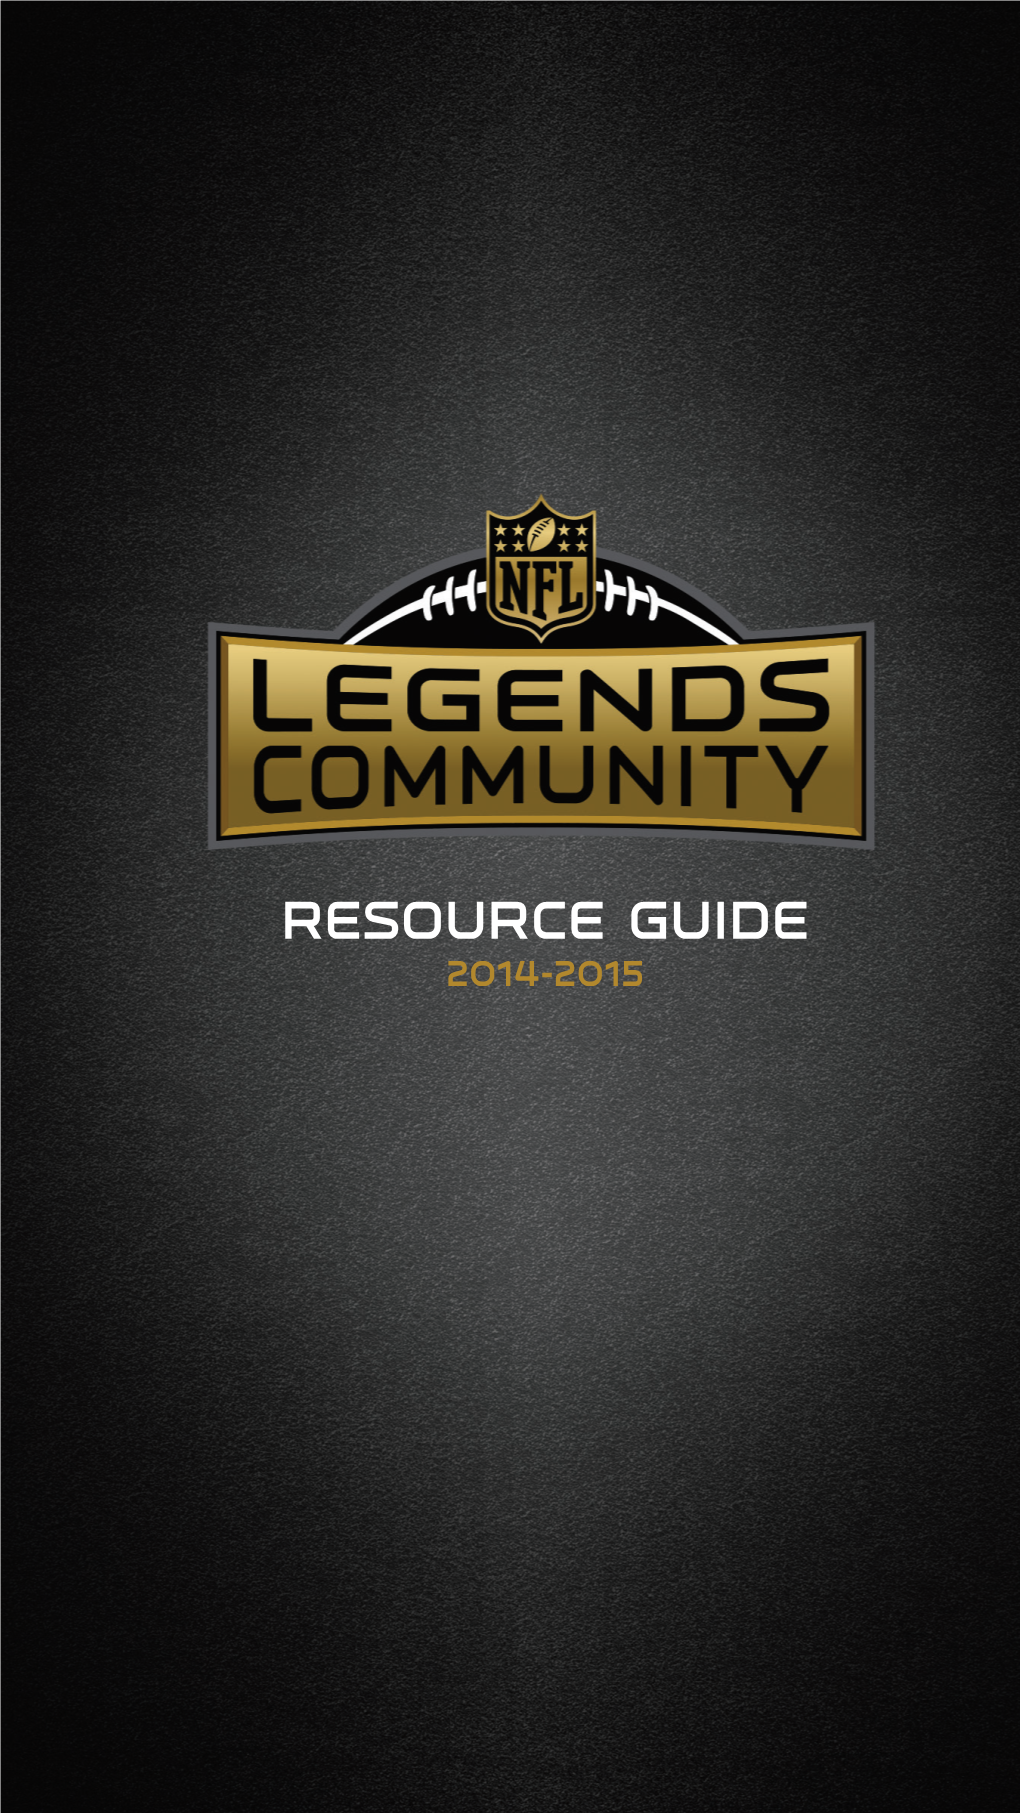 Resource Guide 2014-2015